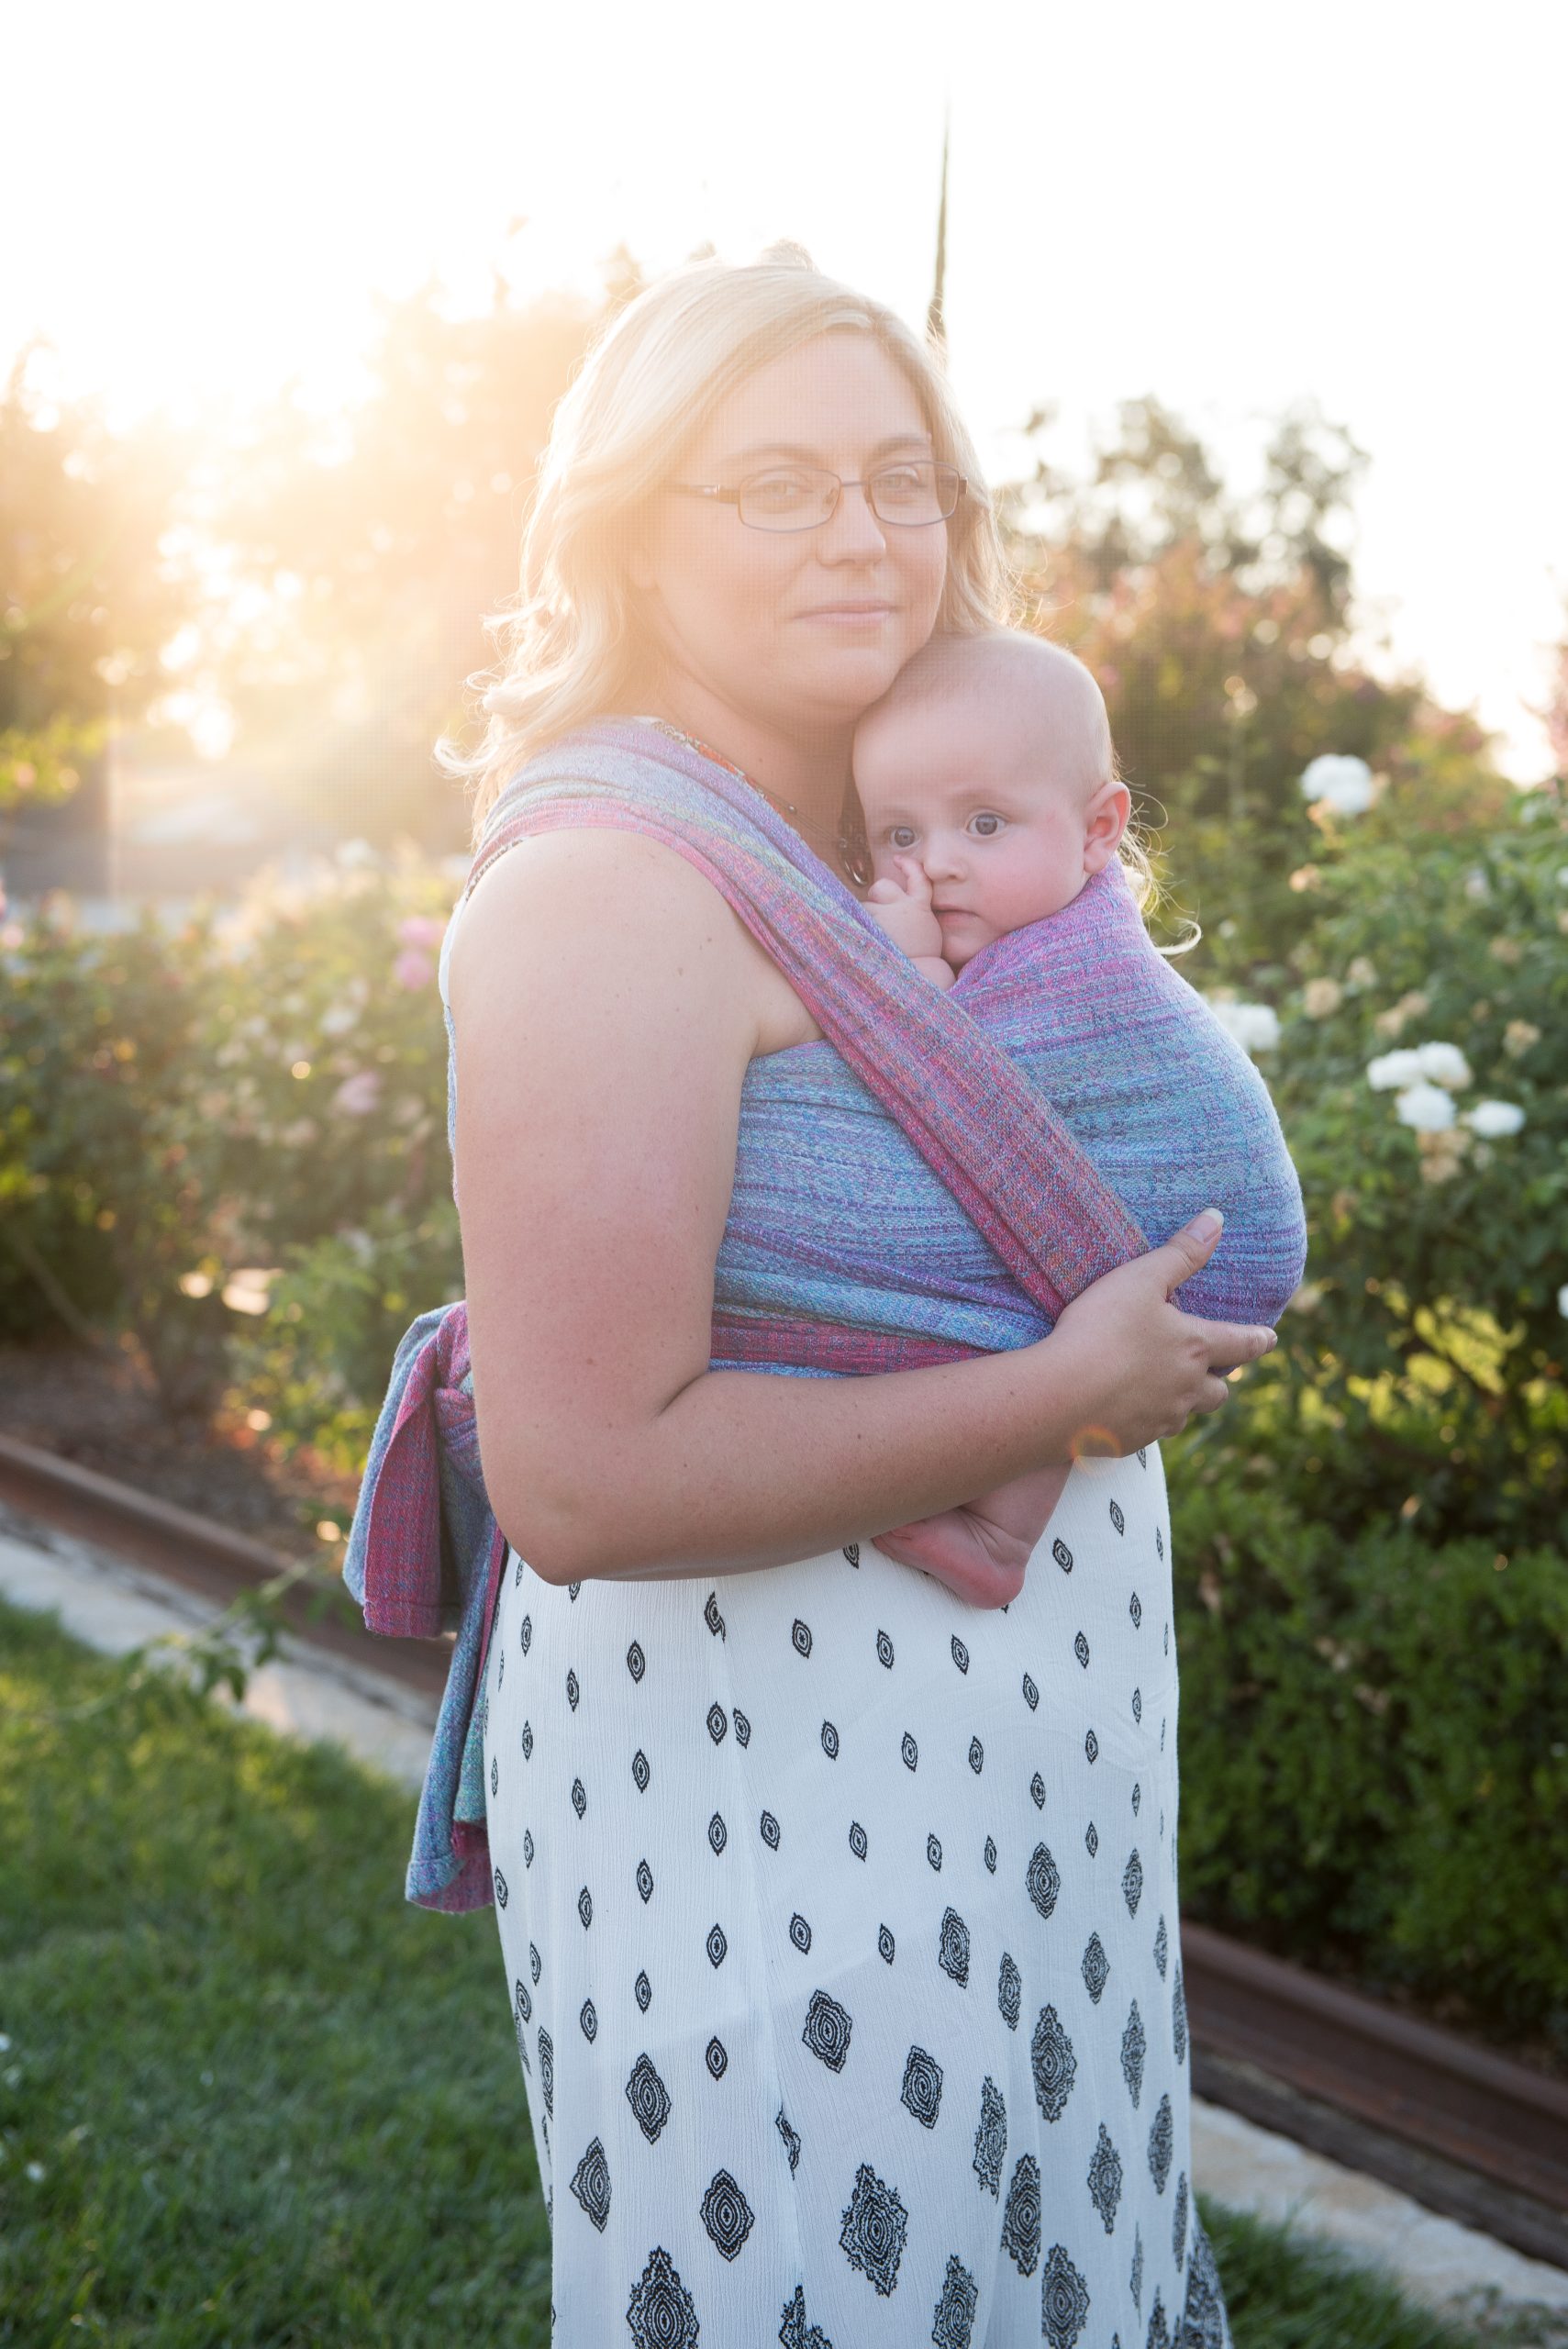 Guide to Baby Wearing | Types of Baby Carriers, How To & Safety Tips